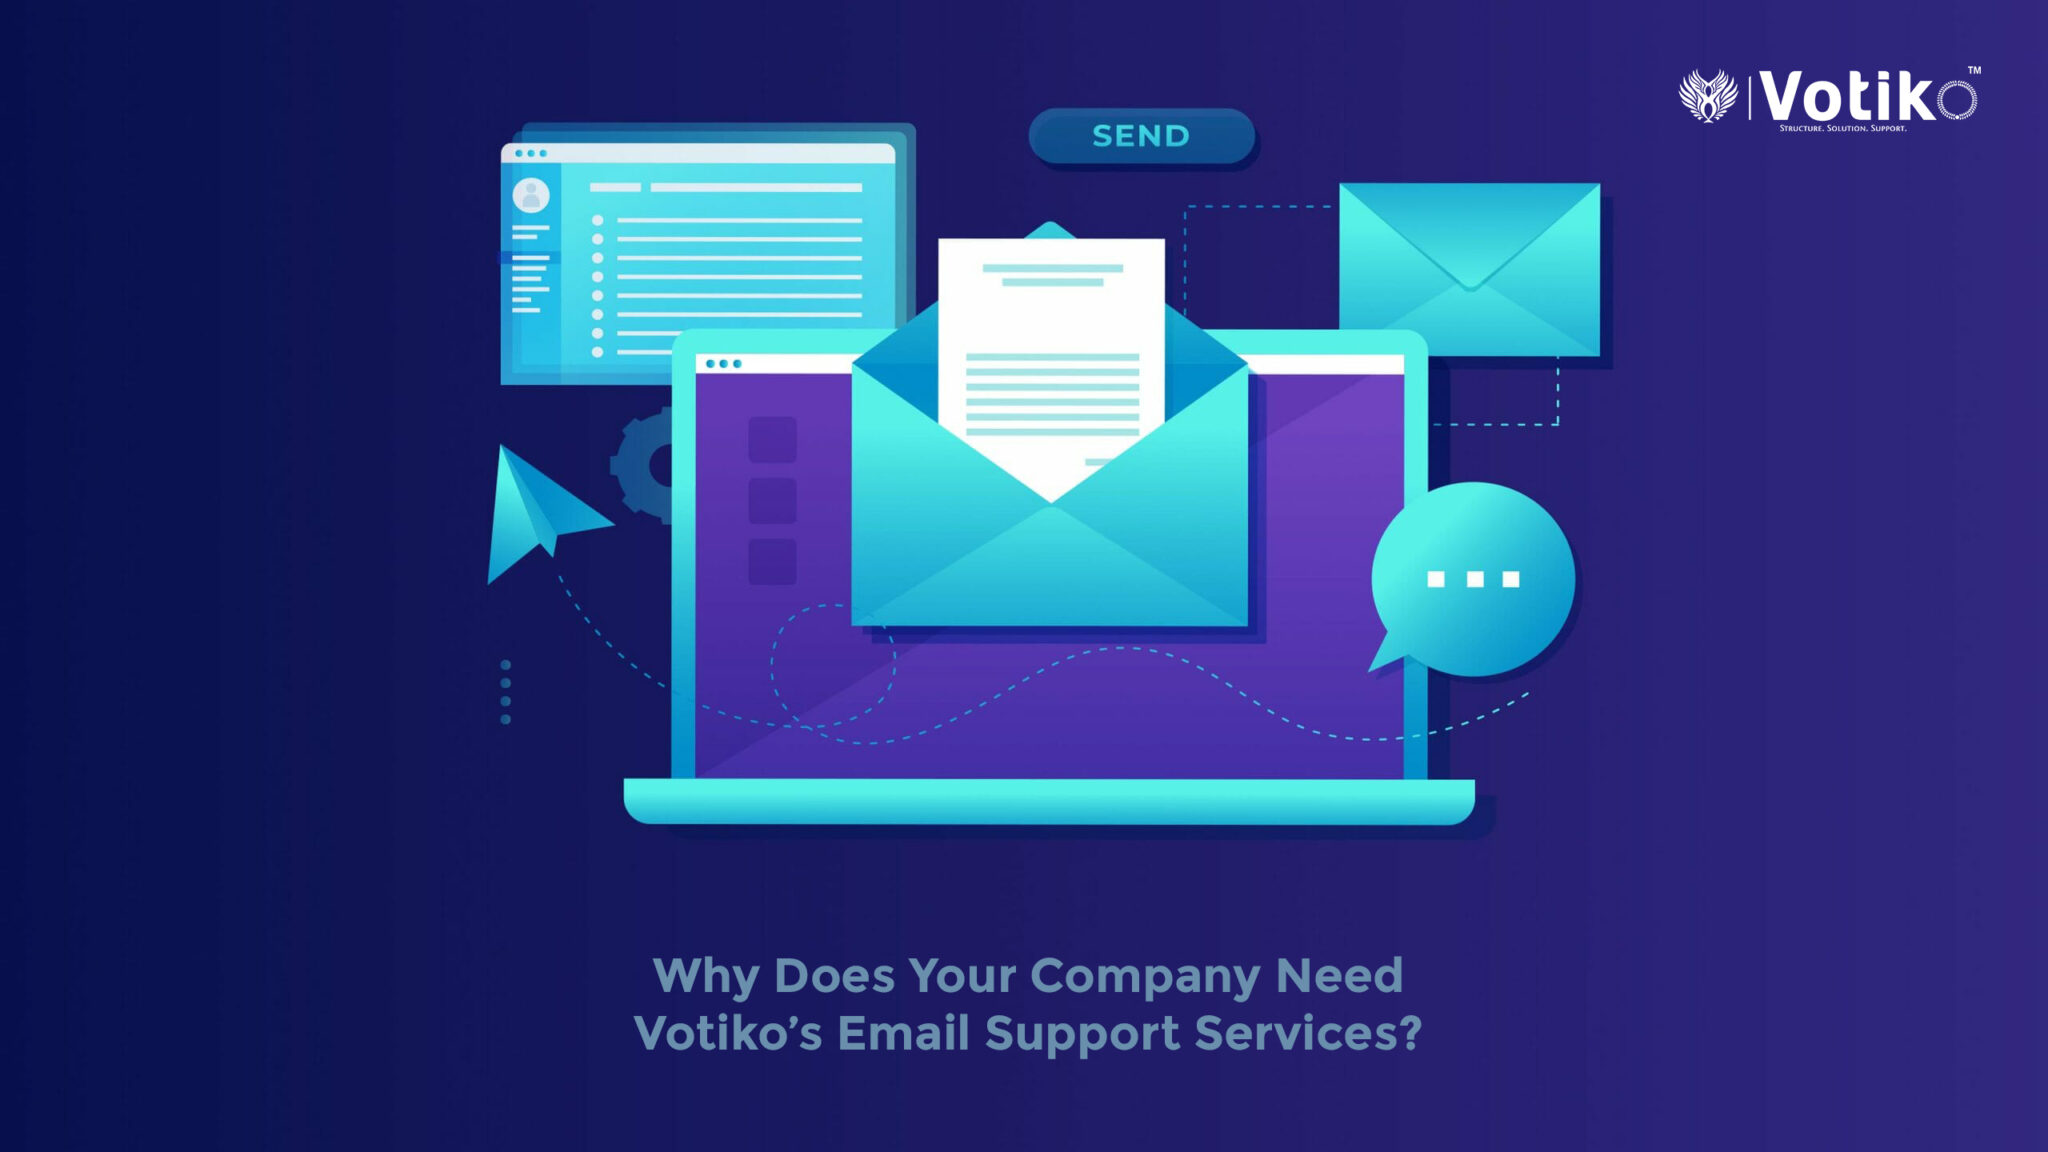 Why Does Your Company Need Votiko’s Email Support Services?